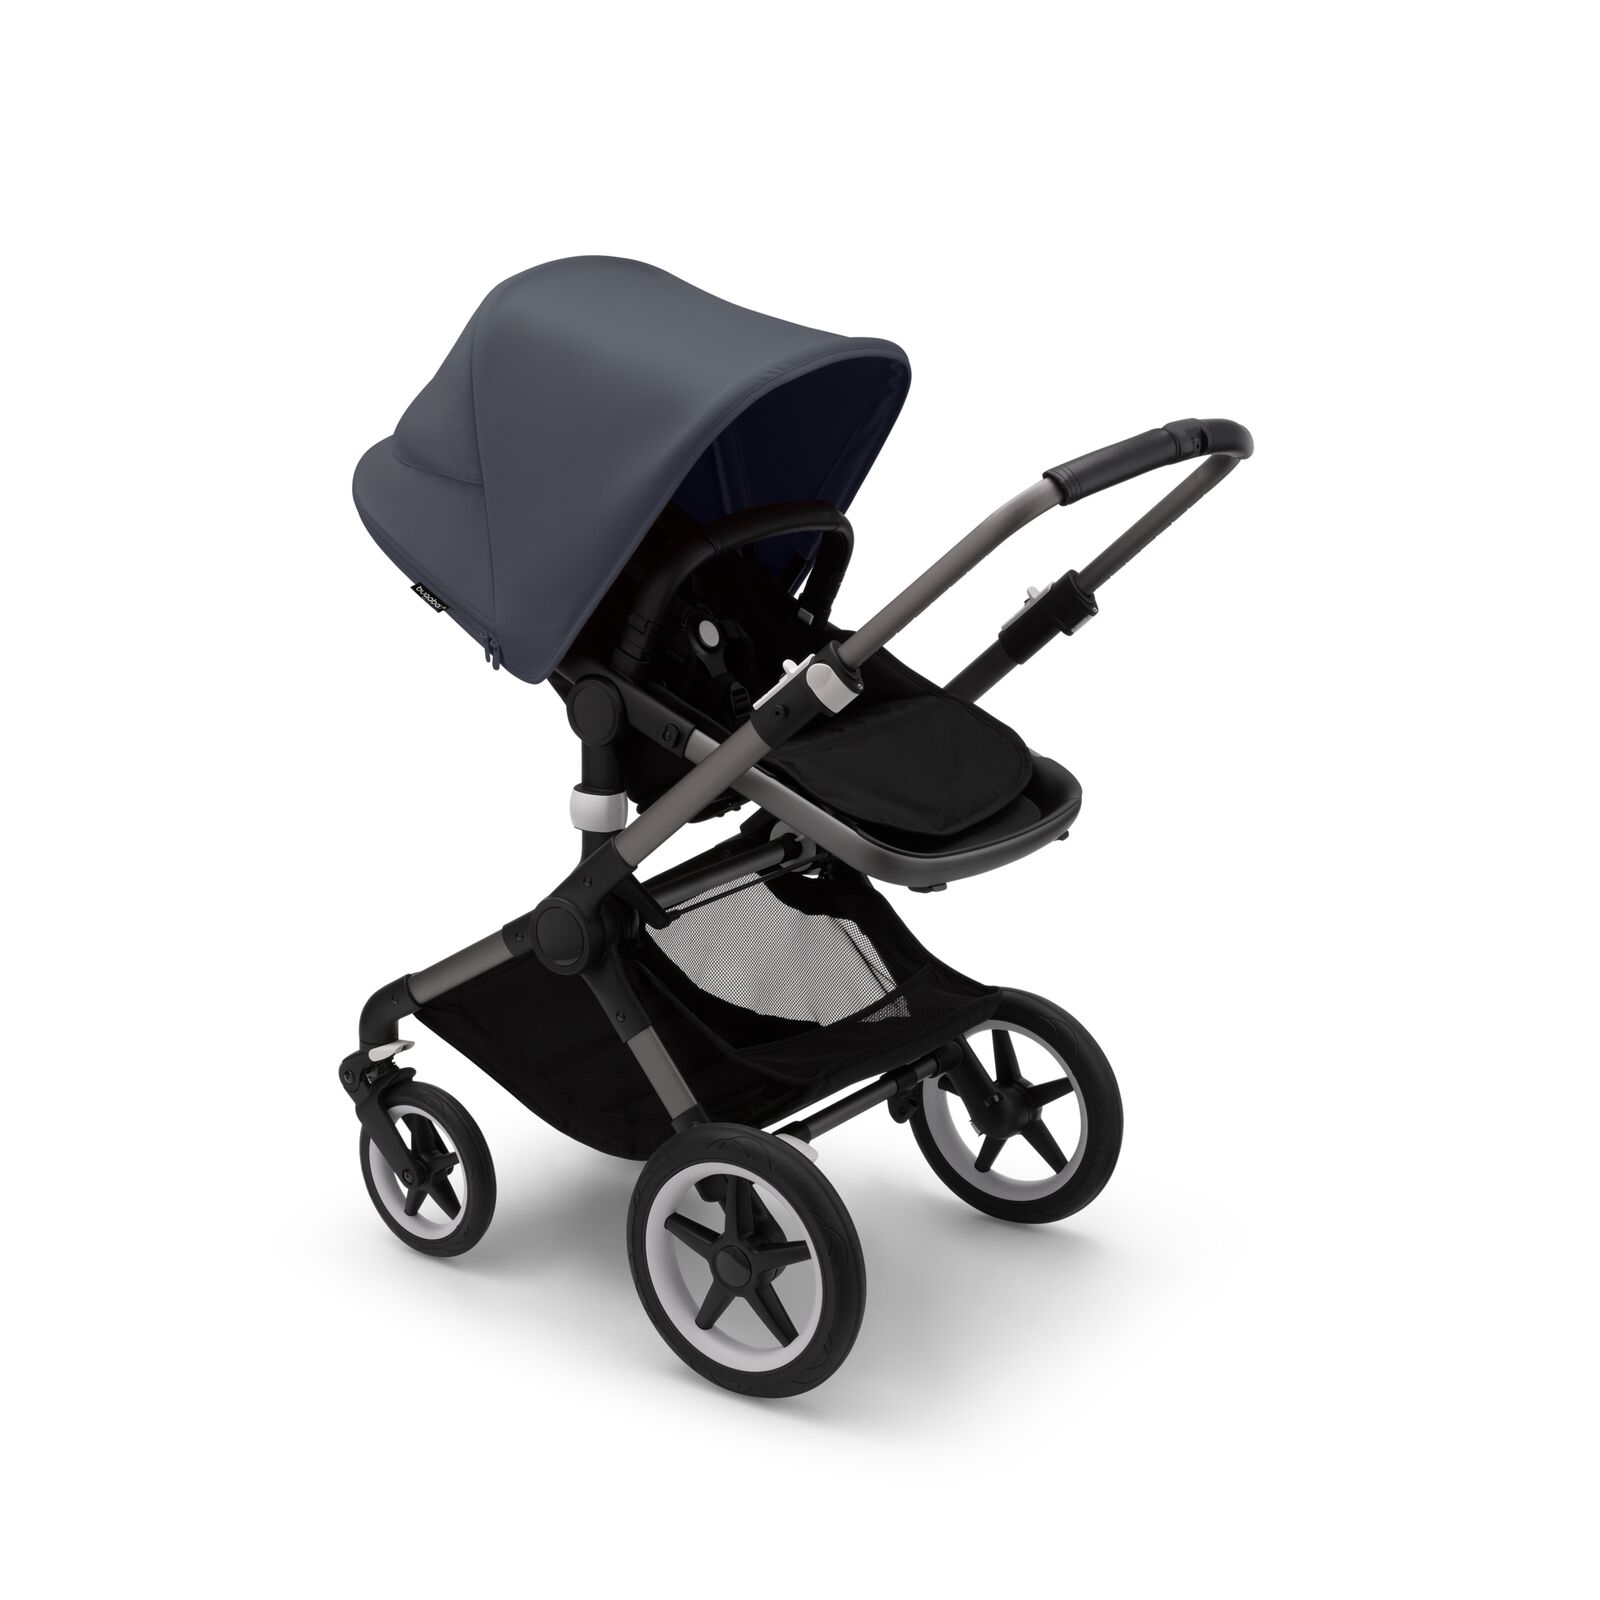 Bugaboo Fox 3 seat stroller with black frame, grey fabrics, and stormy blue sun canopy.